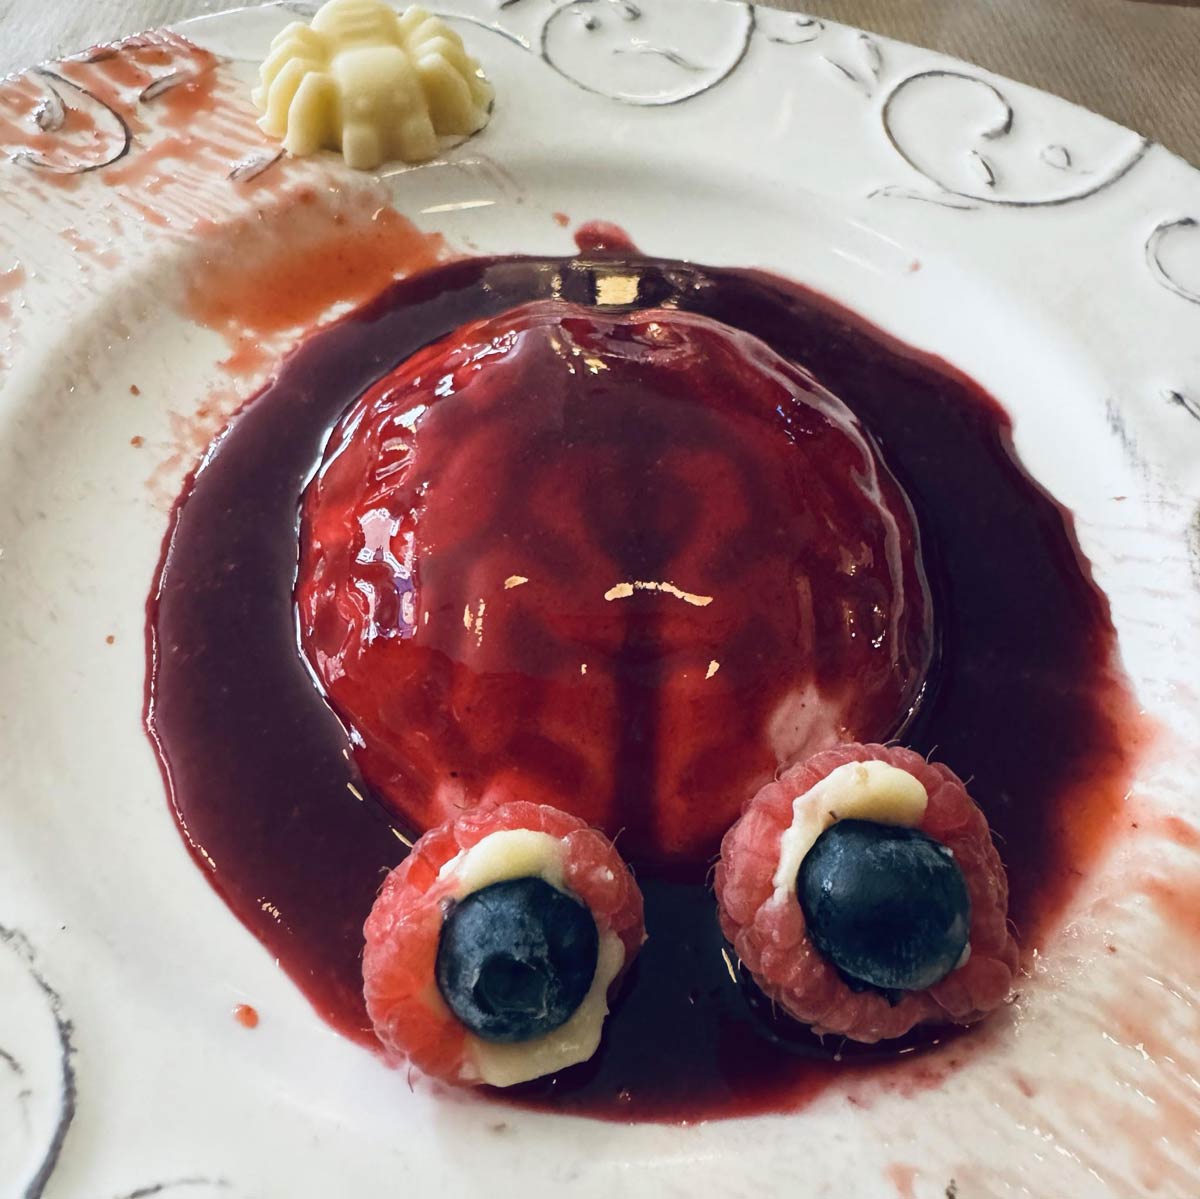 This Halloween themed dessert I was served at lunch